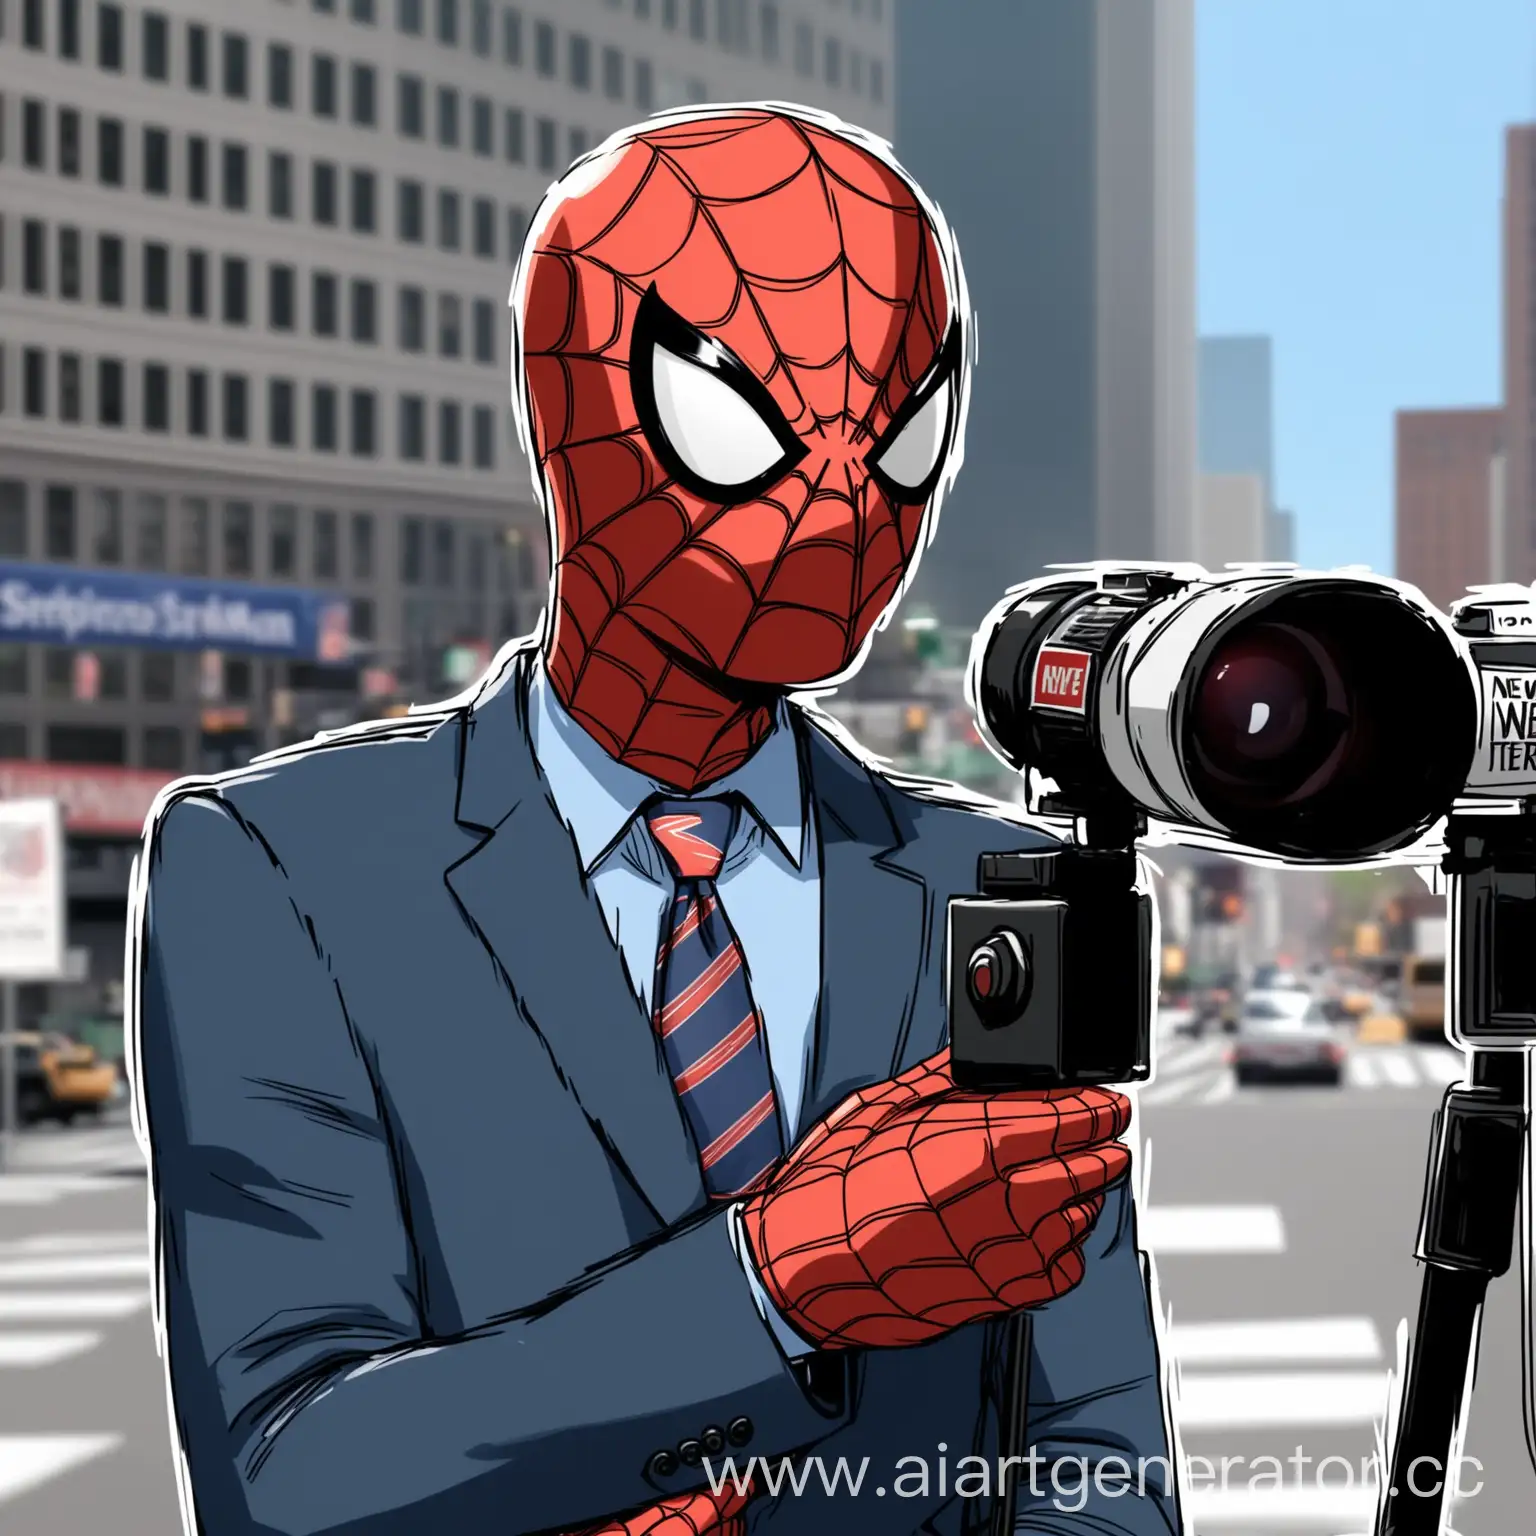 SpiderMan-Reporting-Breaking-News-in-the-City